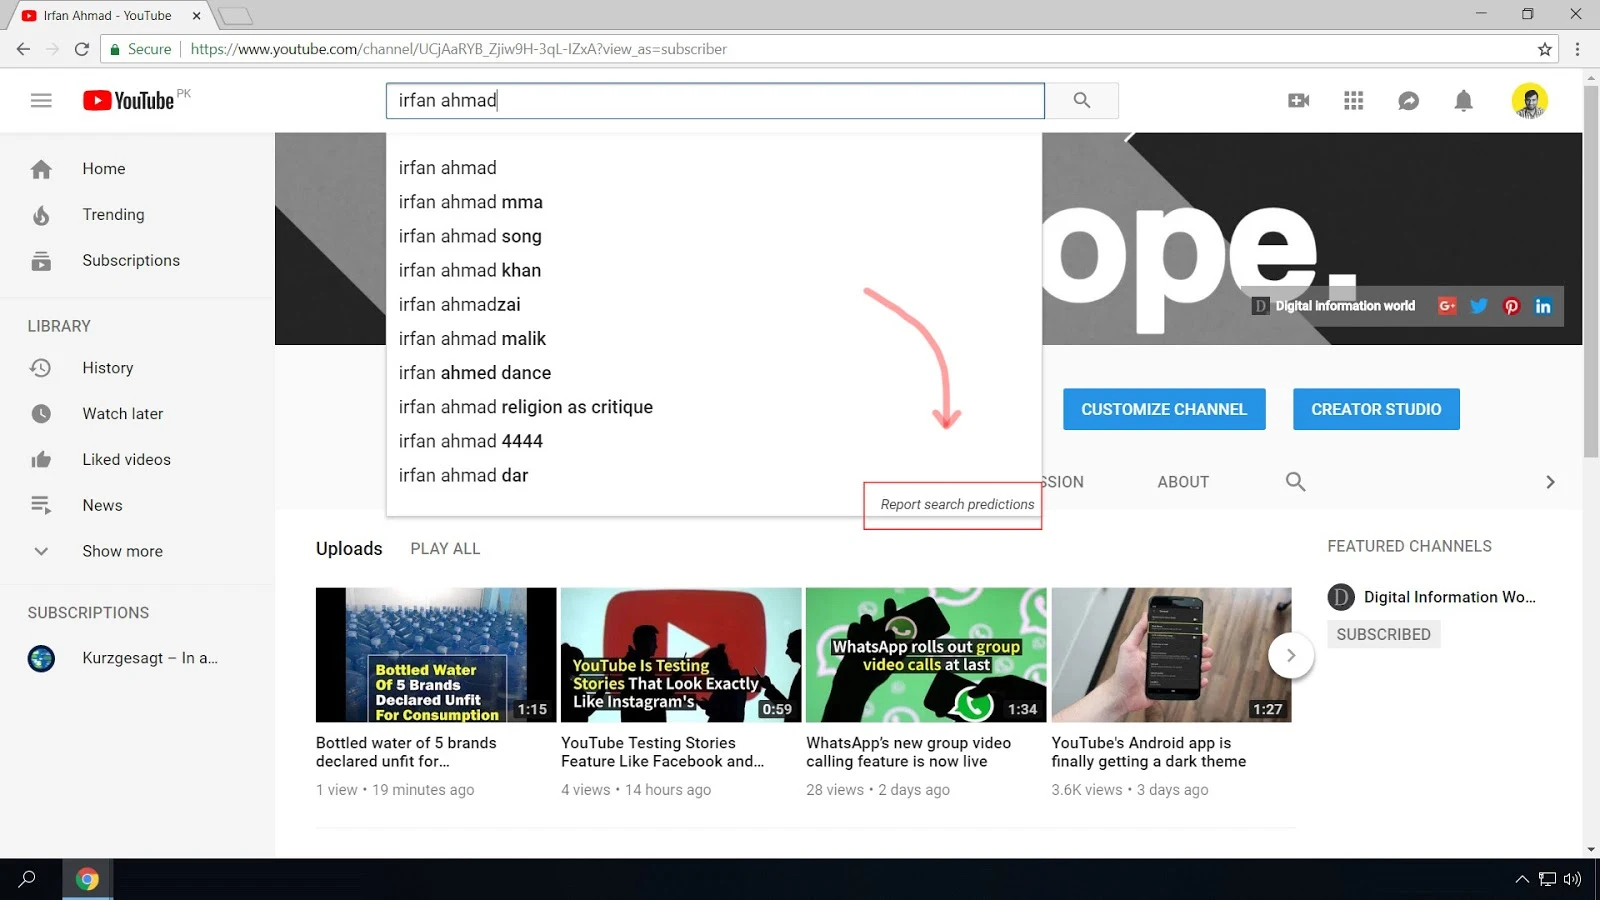 When you search a keyword on youtube.com, its search algorithm tries to predict your search query. If you think a prediction violates one of the Autocomplete policies, you can report it by clicking "Report search predictions" feature.